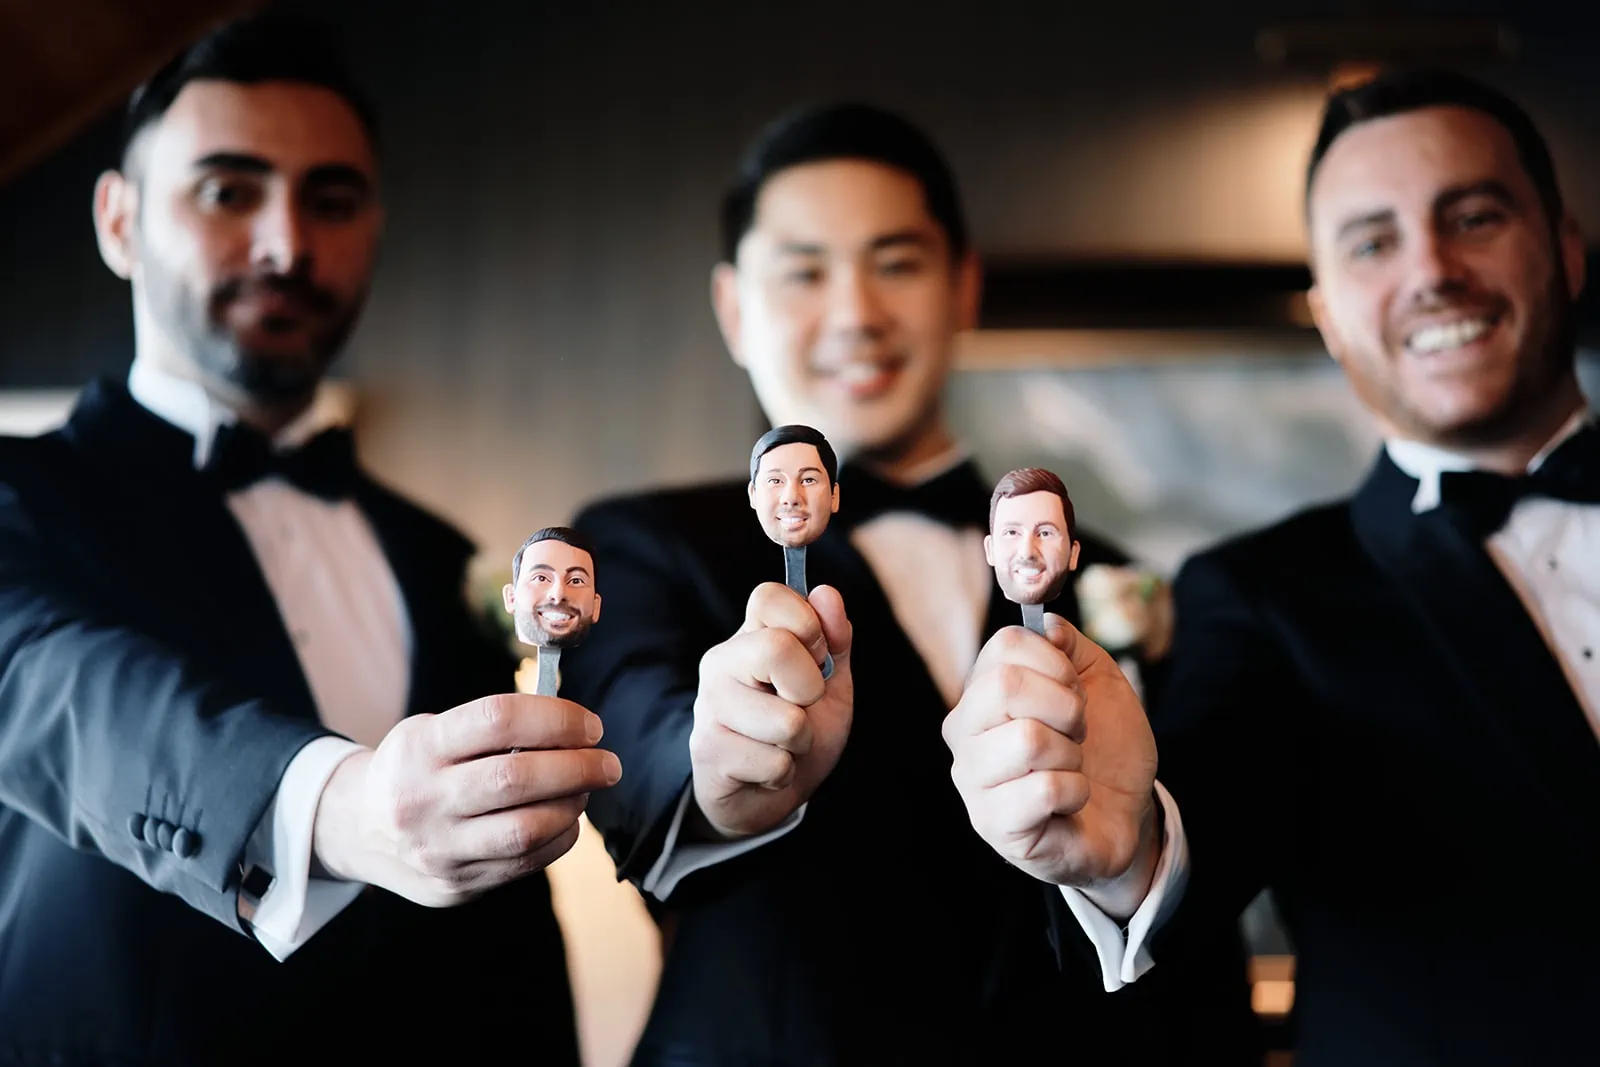 Queenstown New Zealand Elopement Wedding Photographer - A group of groomsmen holding up fake groomsmen heads during a traditional wedding.